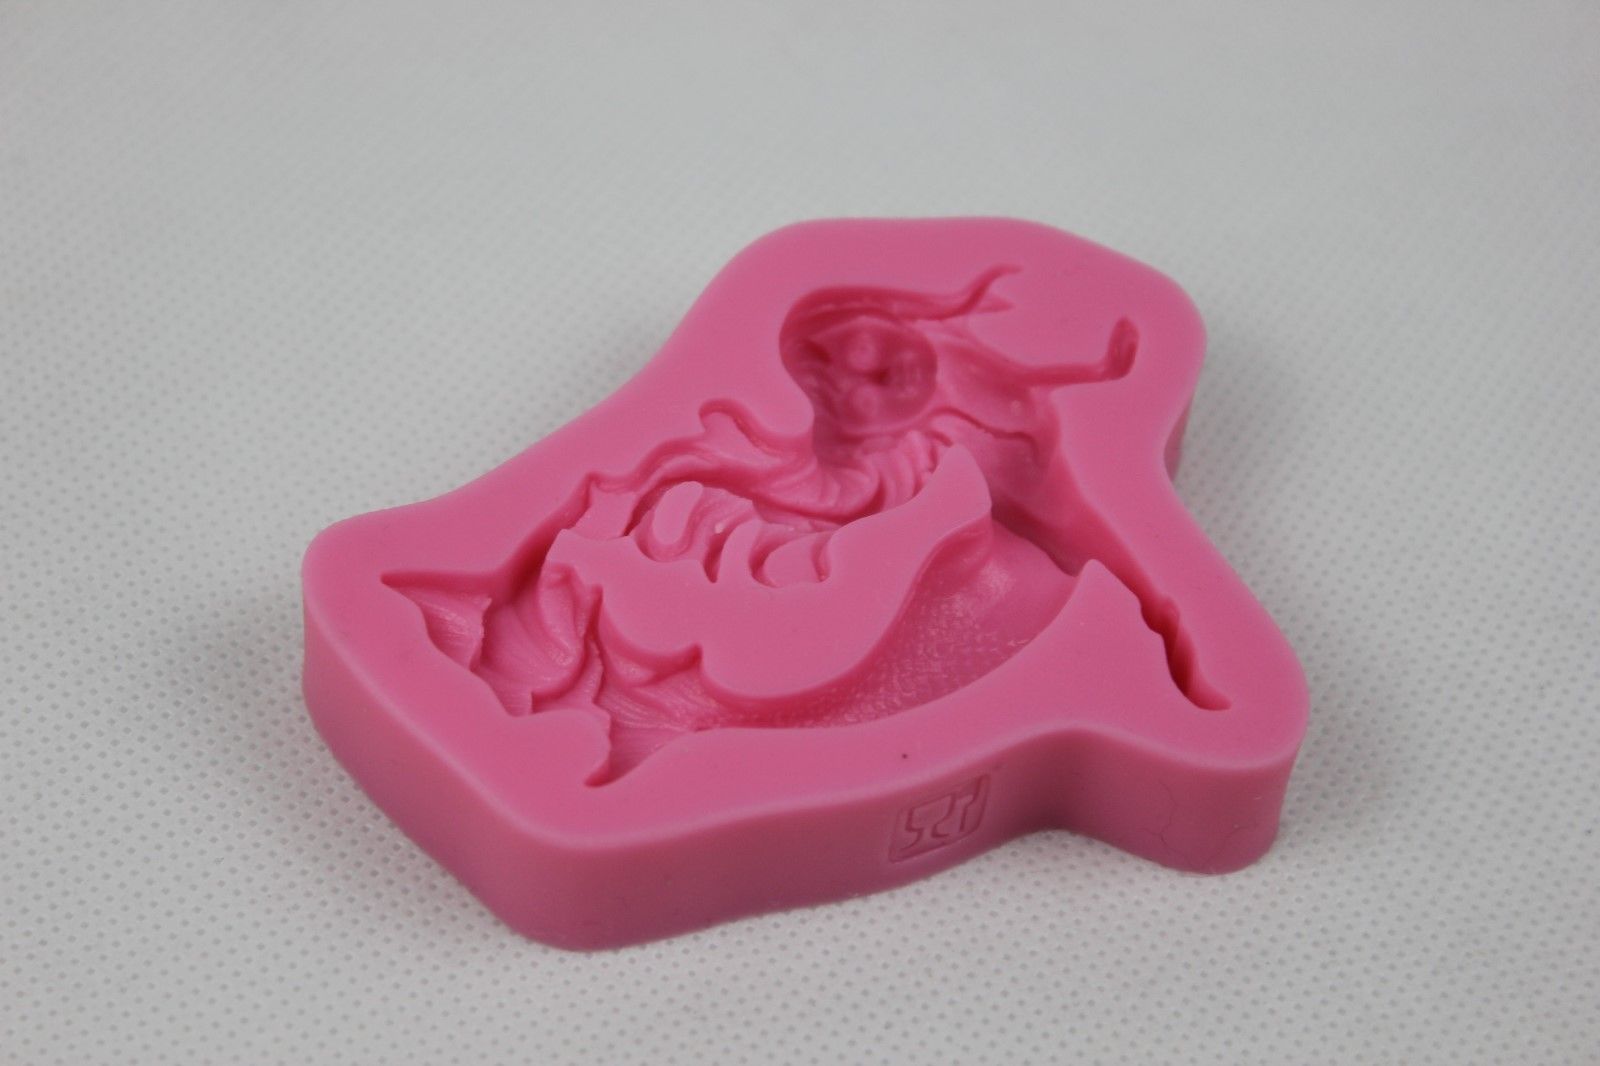 attachment-https://www.cupcakeaddicts.co.uk/wp-content/uploads/imported/3/Mermaid-Silicone-Mould-Fairy-Cup-Cake-Icing-Baking-Decorating-Birthday-Toppers-323163245923-2.jpg